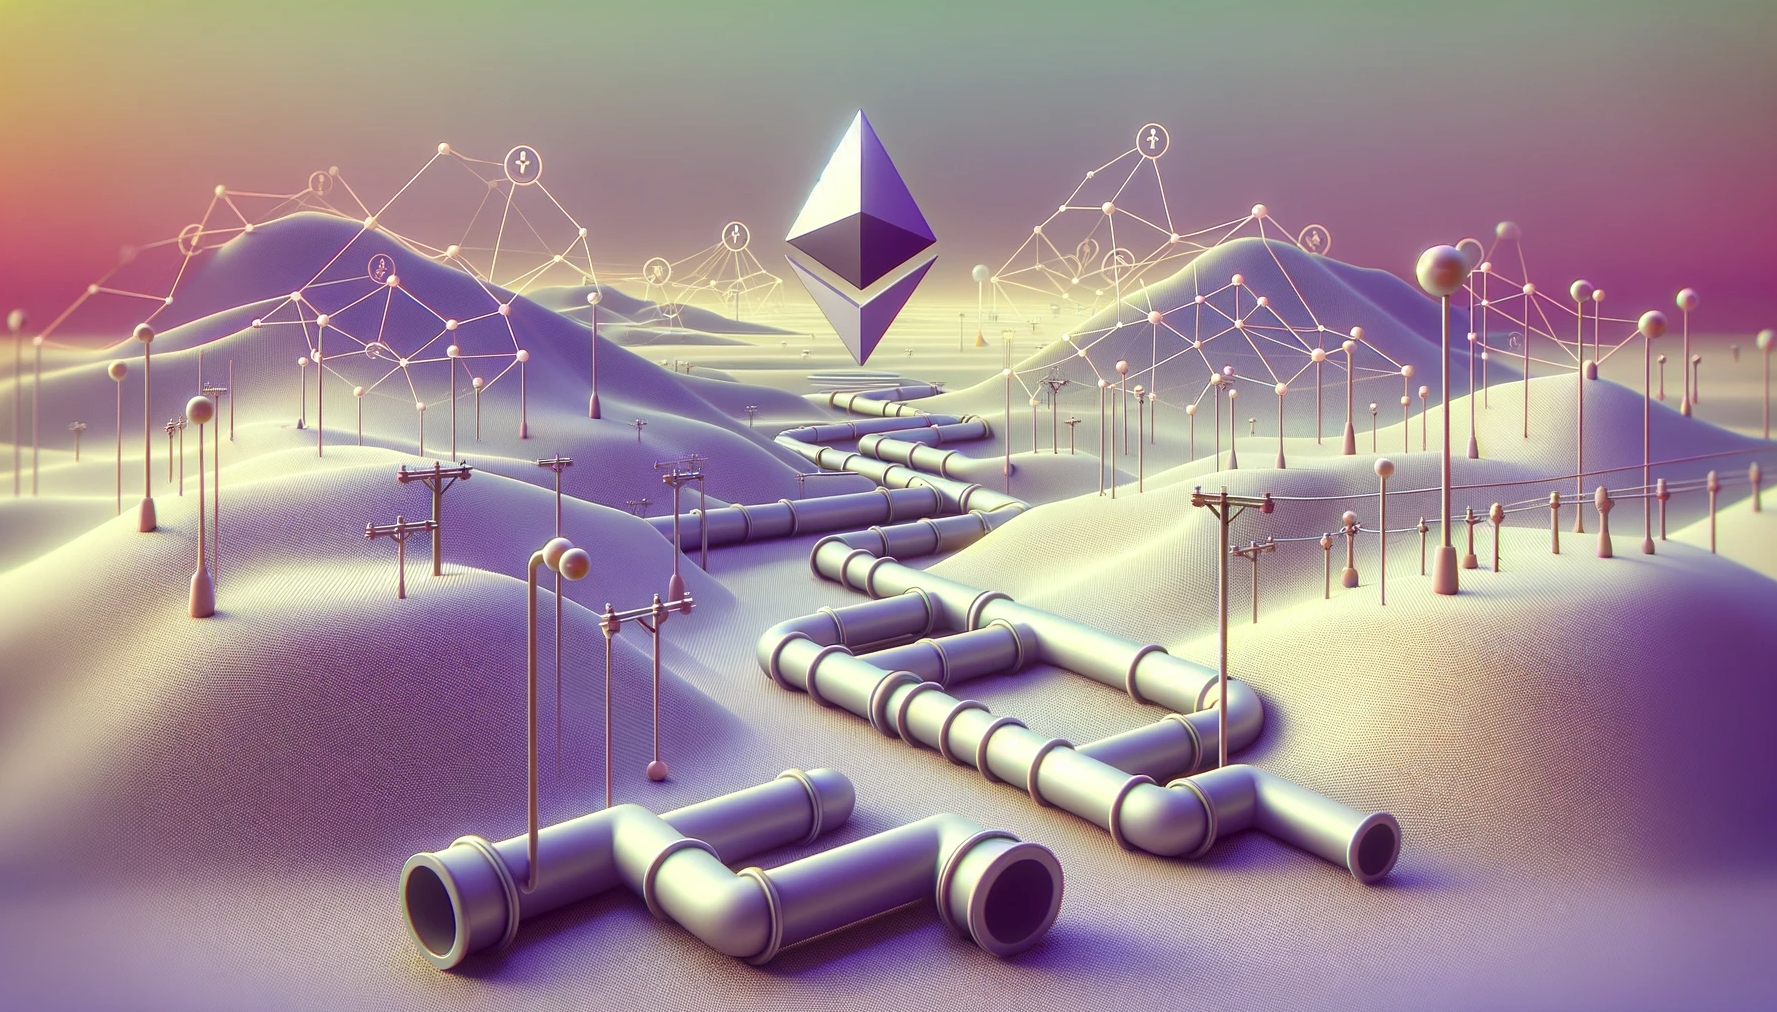 Illustrative art image - showing a landscape with pipes and a blockchain network in the background, illustrating Alchemy Pipelines